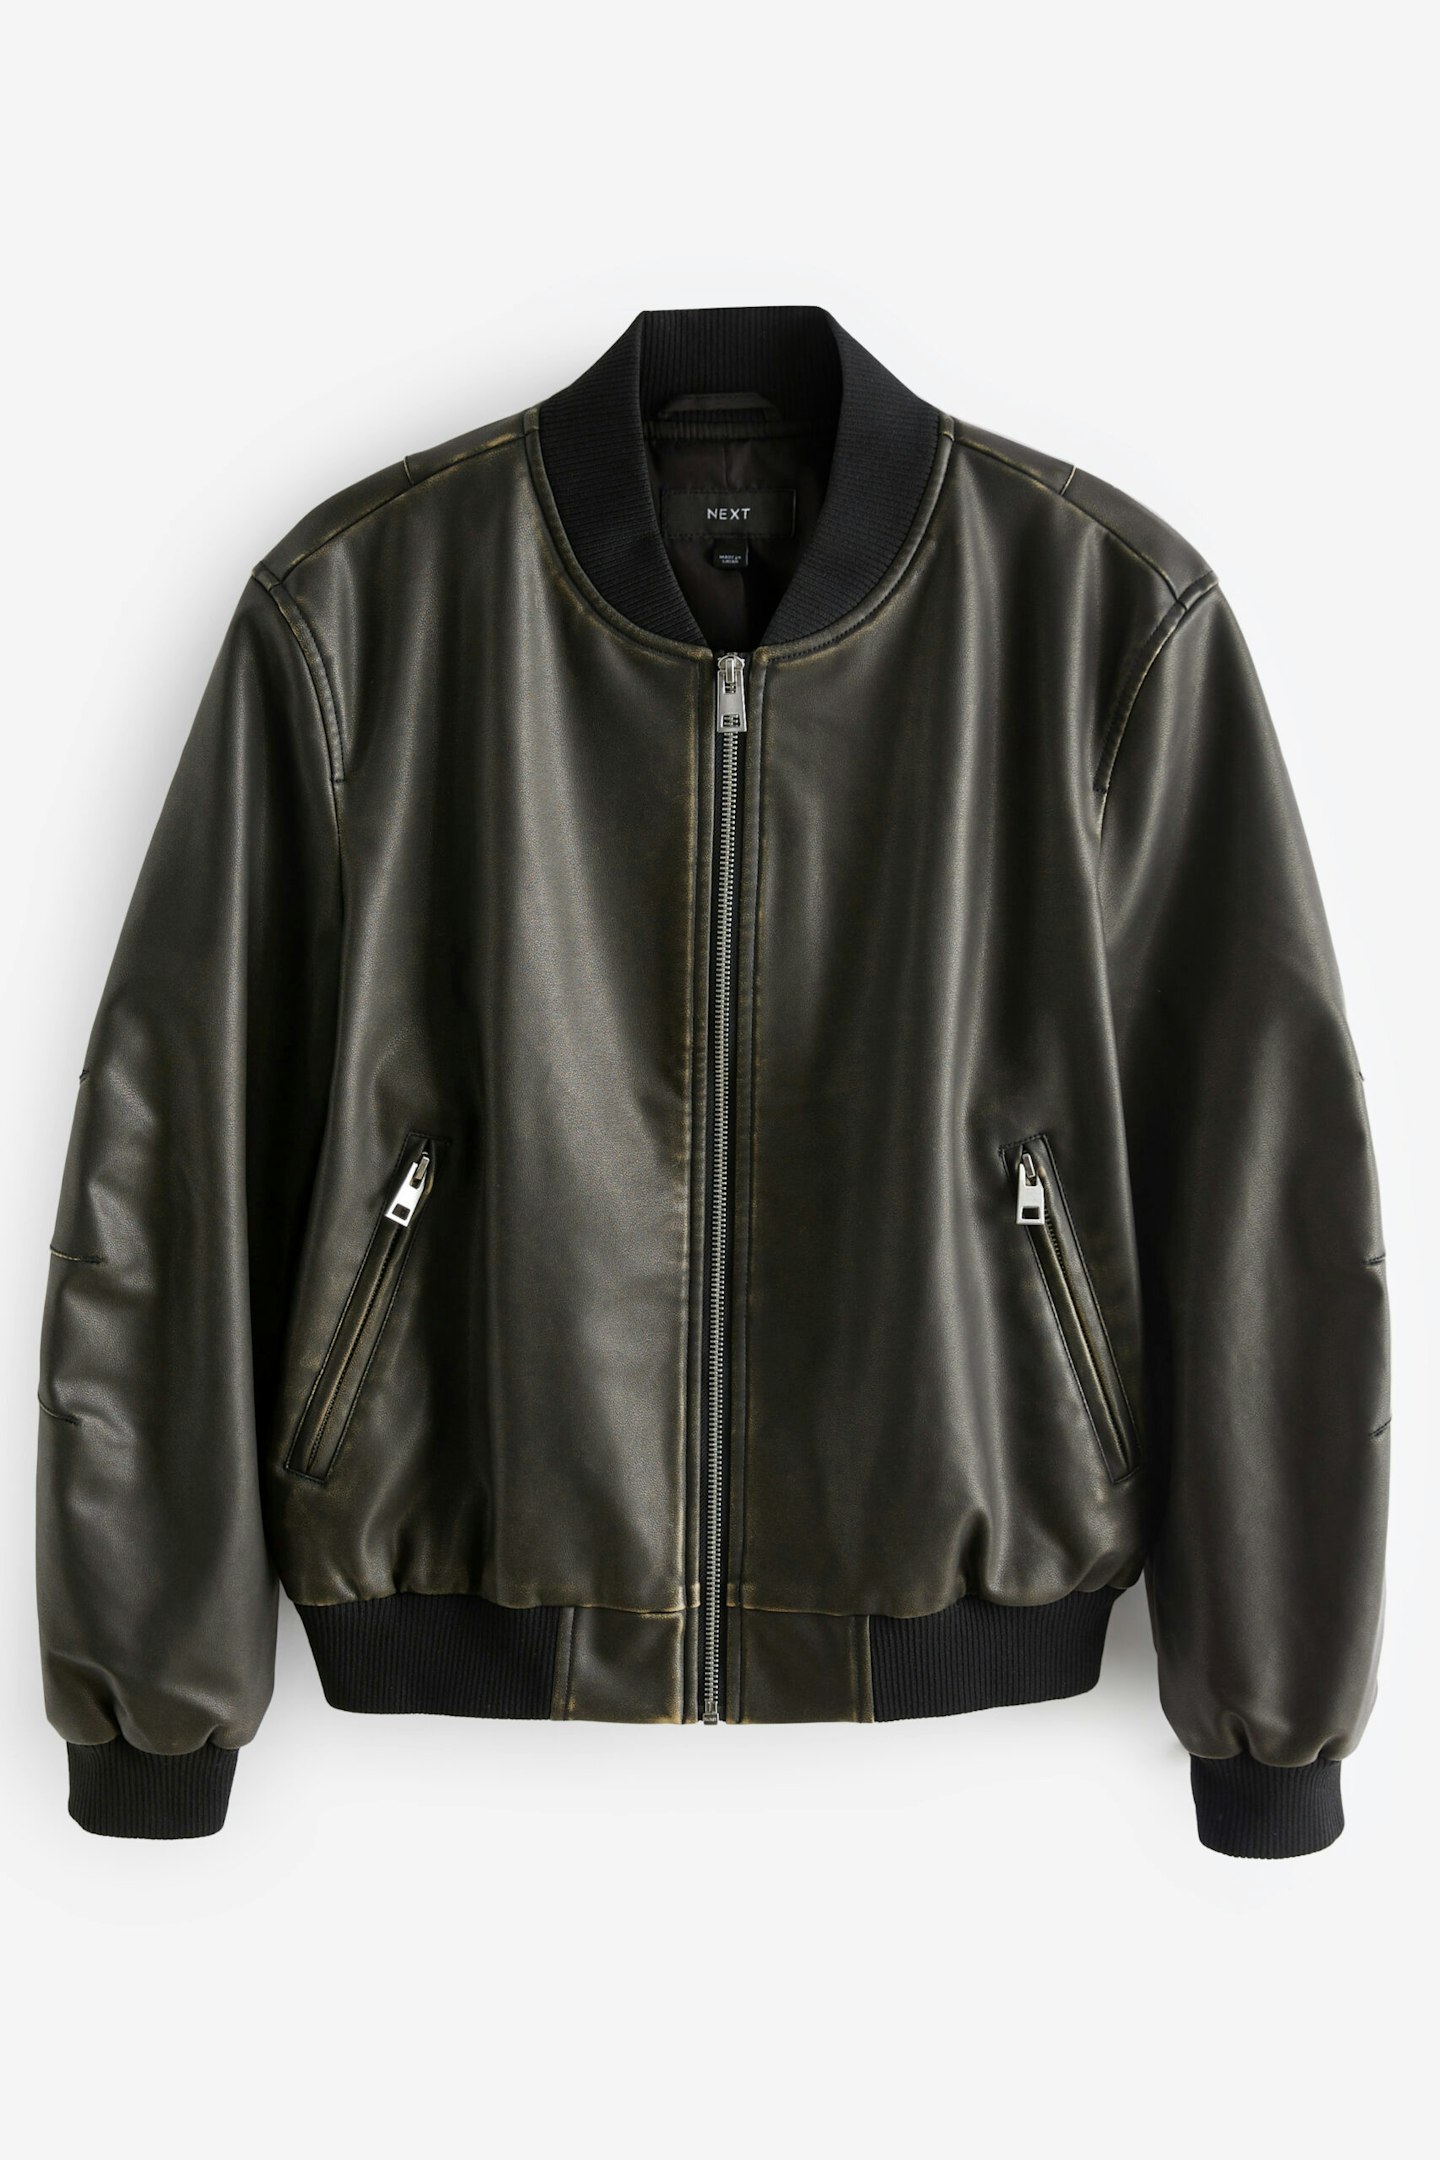 Next Black Distressed Faux Leather Bomber Jacket